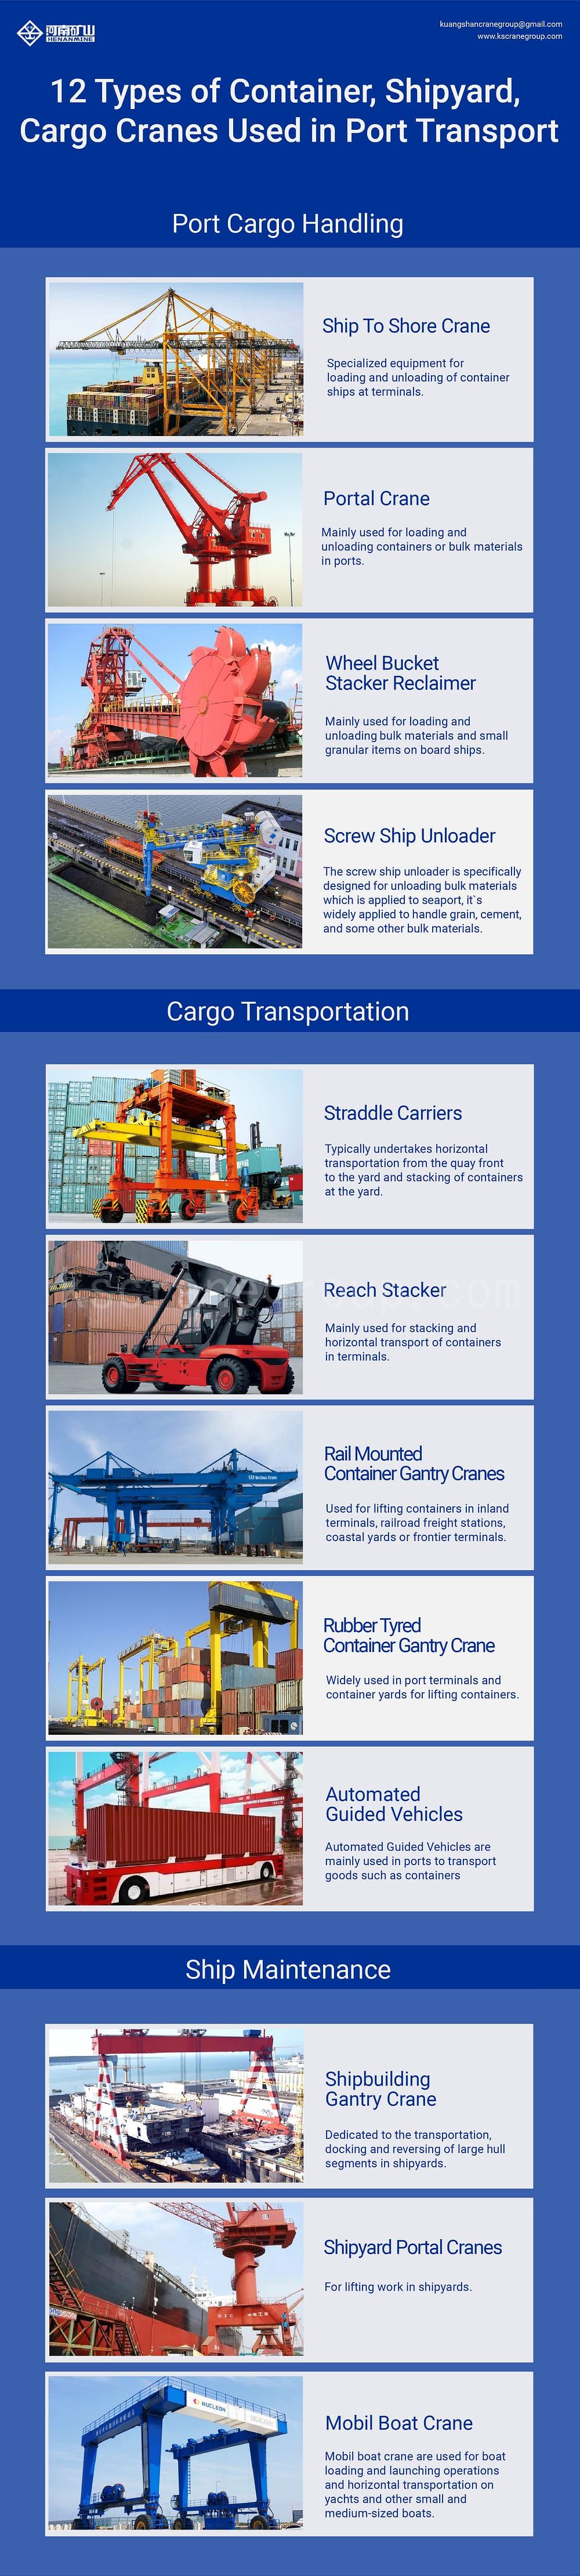 Types of Container, Shipyard, Cargo Cranes Used in Port Transport